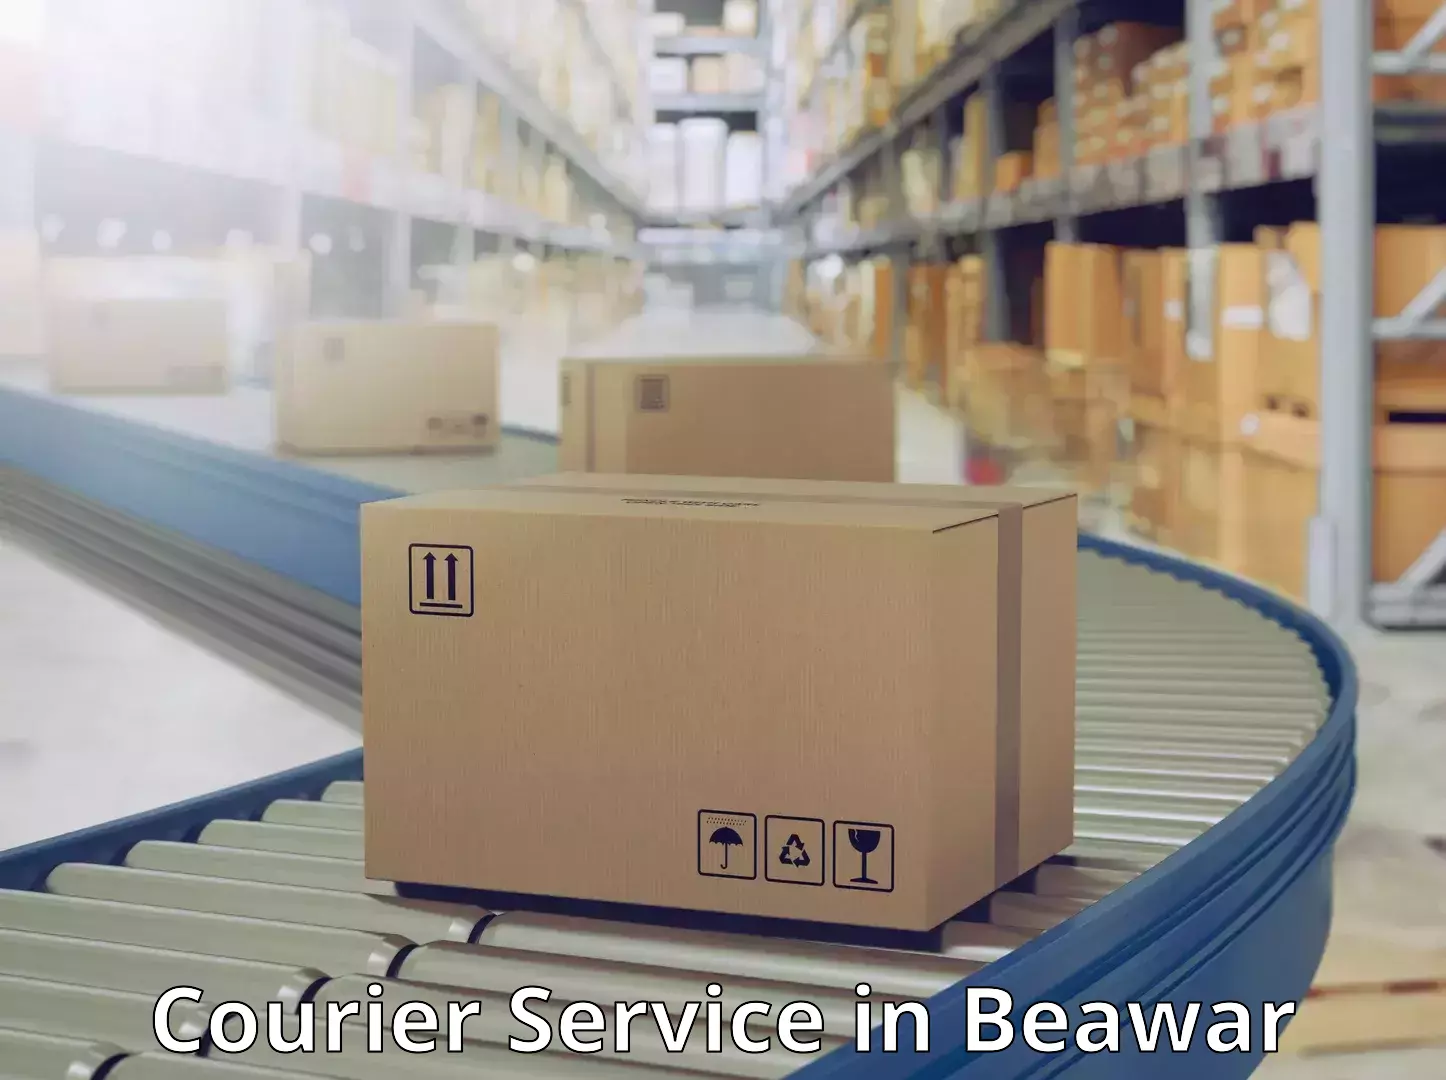 Fast shipping solutions in Beawar